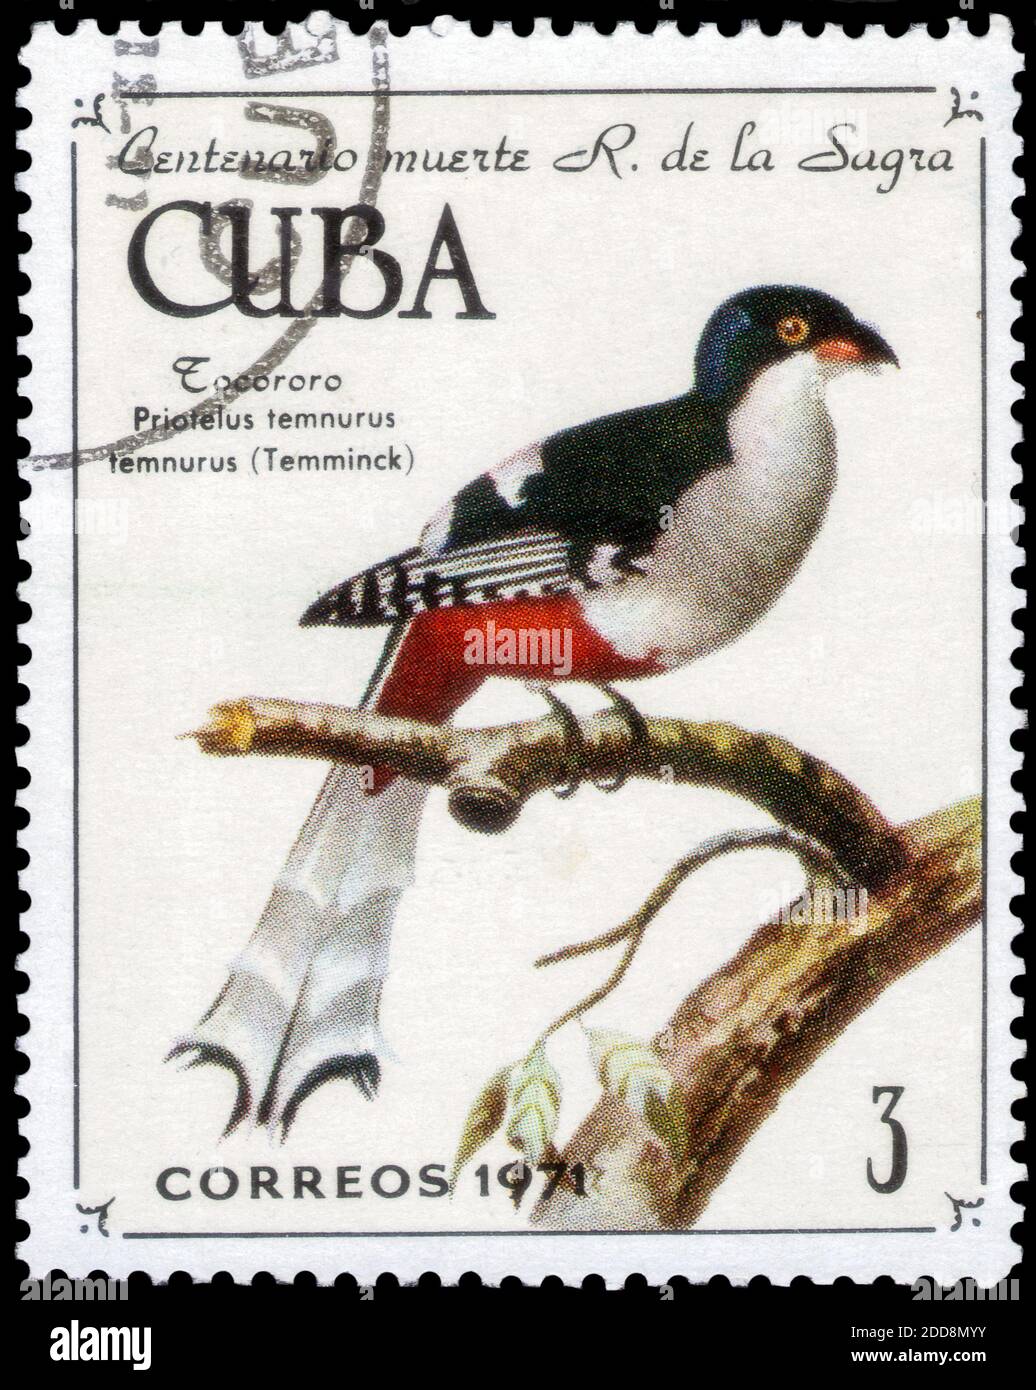 Saint Petersburg, Russia - November 12, 2020: Stamp printed in the Cuba with the image of the Cuban Trogon, Priotelus temnurus, circa 1971 Stock Photo